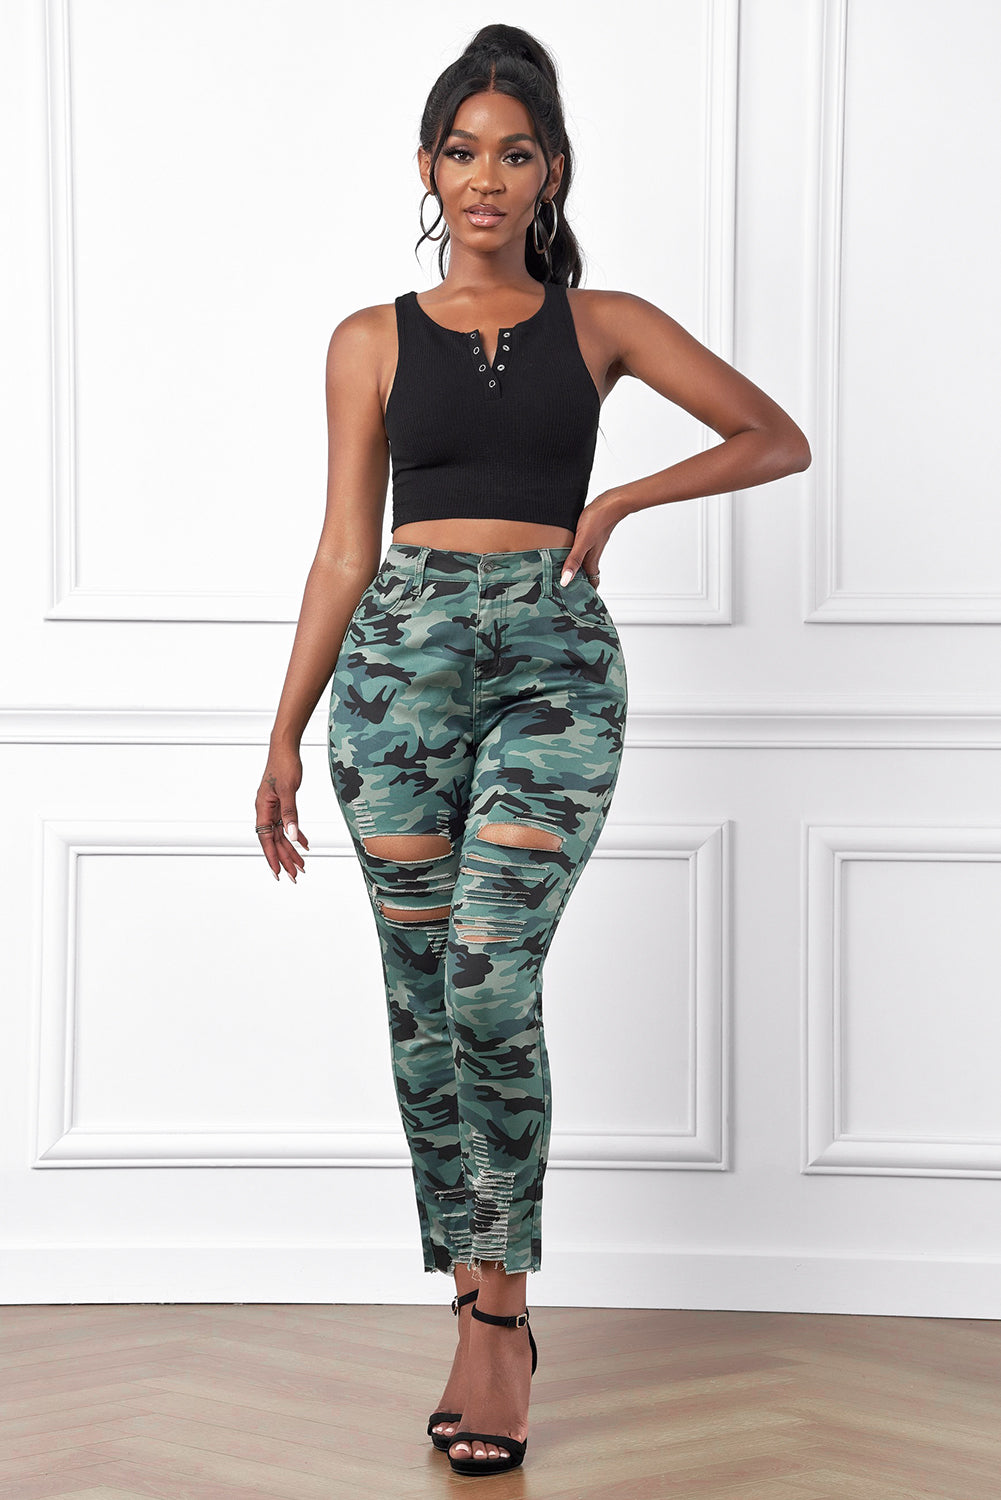 Green Camouflage Hollow out Ripped Skinny Jeans with Pockets for Women LC78149-9